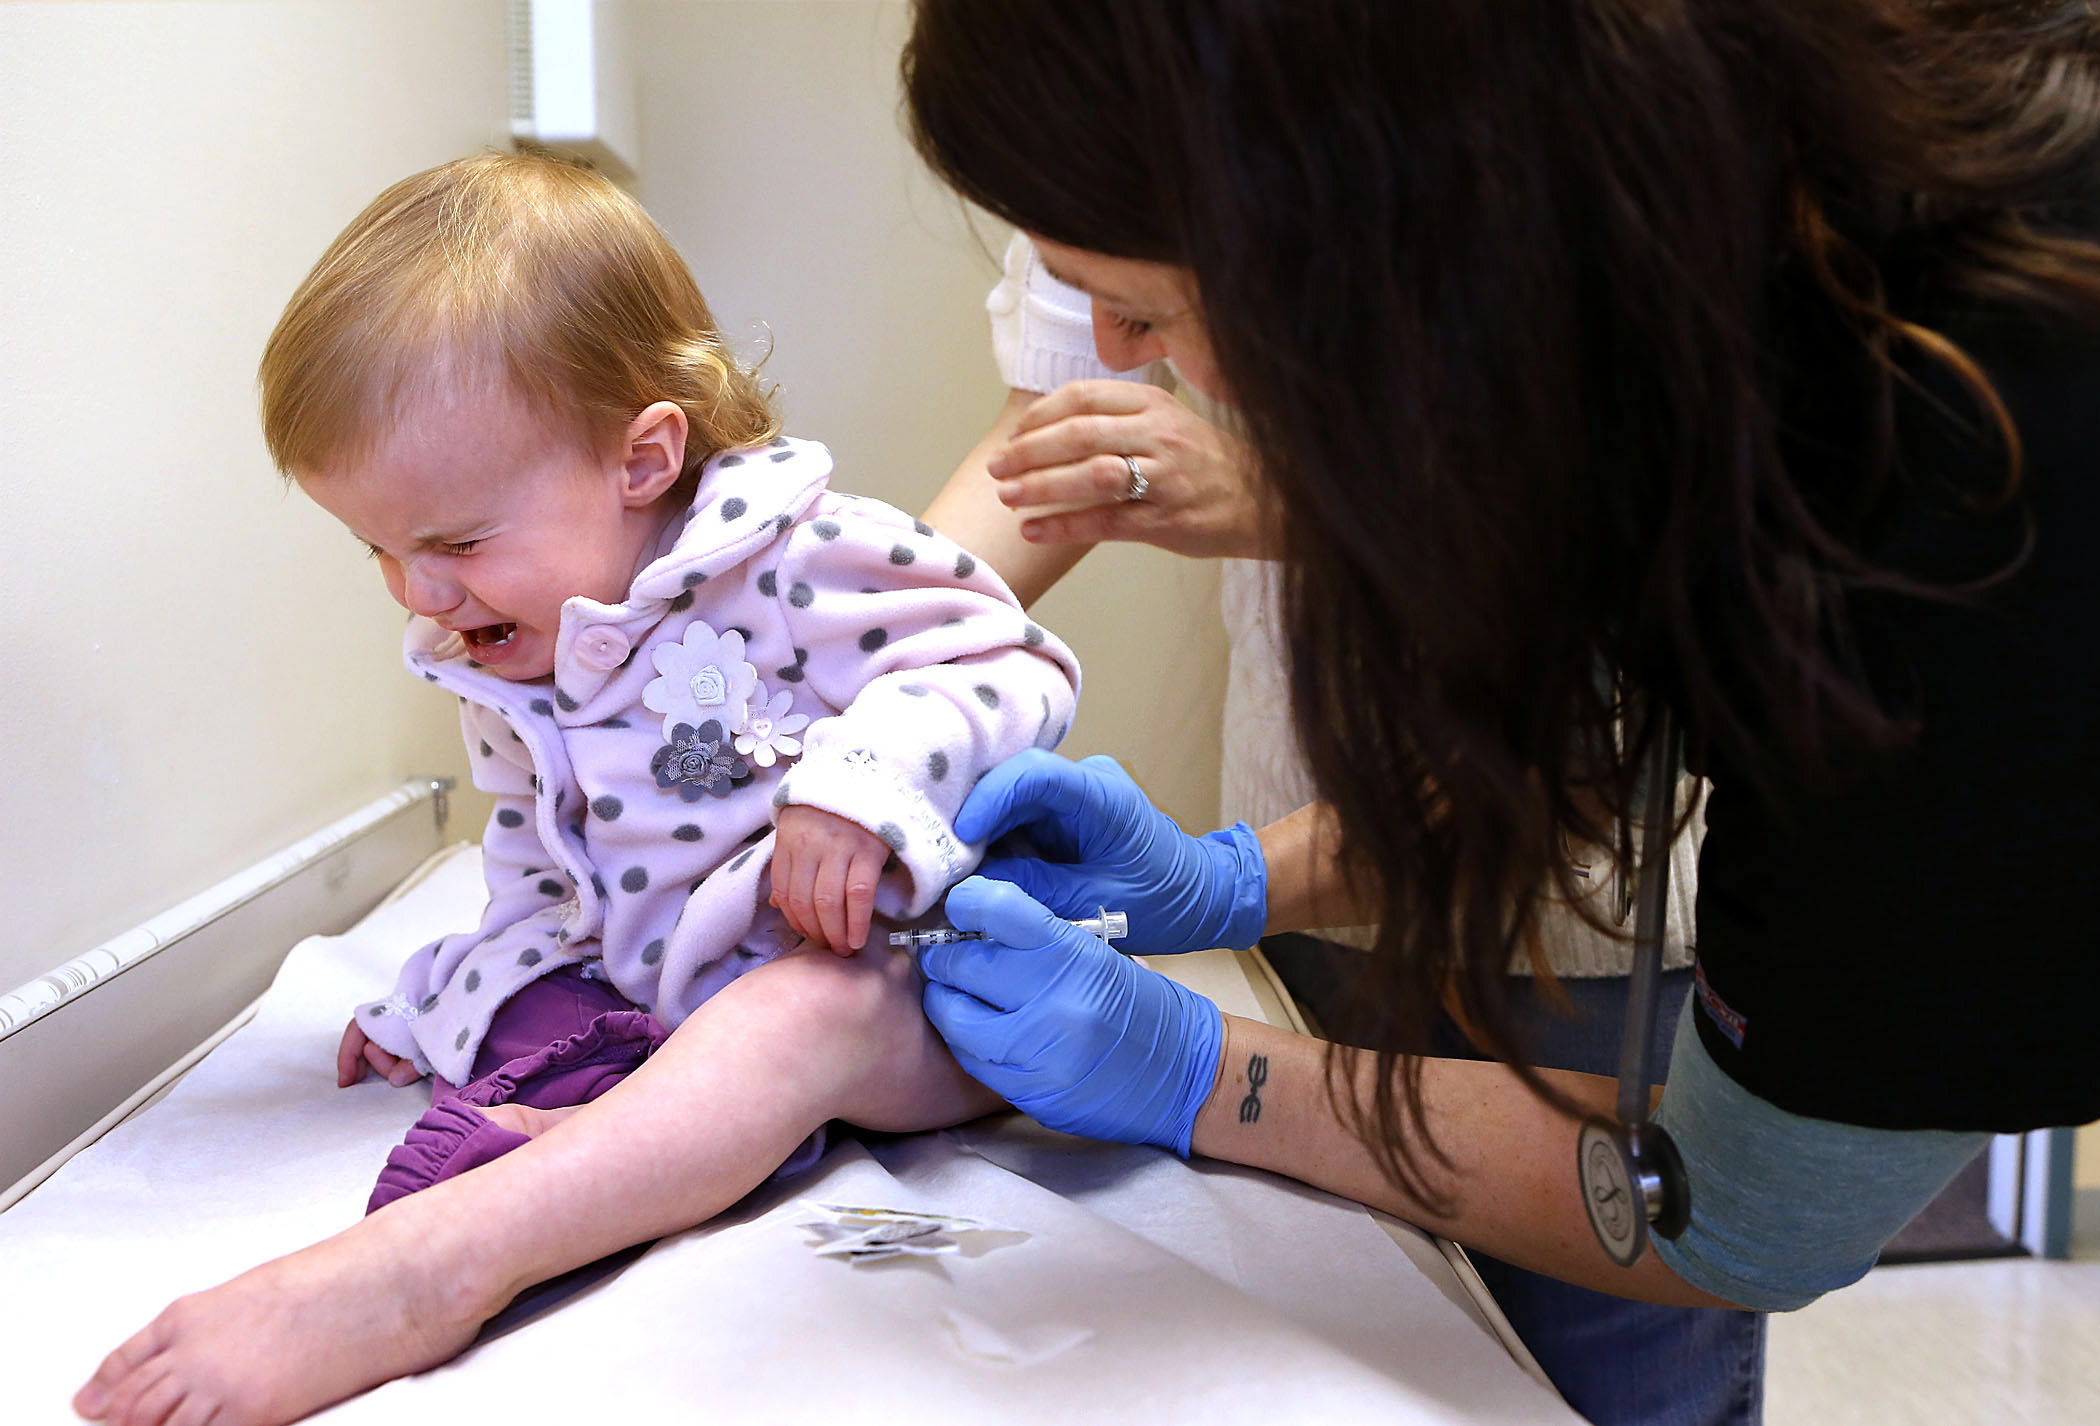 PAUL CARTER/The (Eugene) Register Guard
Sophia Stricker, 17 months, endures a flu shot from nurse Katy Whitman on Friday in Eugene, Ore. Clark County Health Officer Dr. Alan Melnick says it's still not too late to get a flu vaccine.